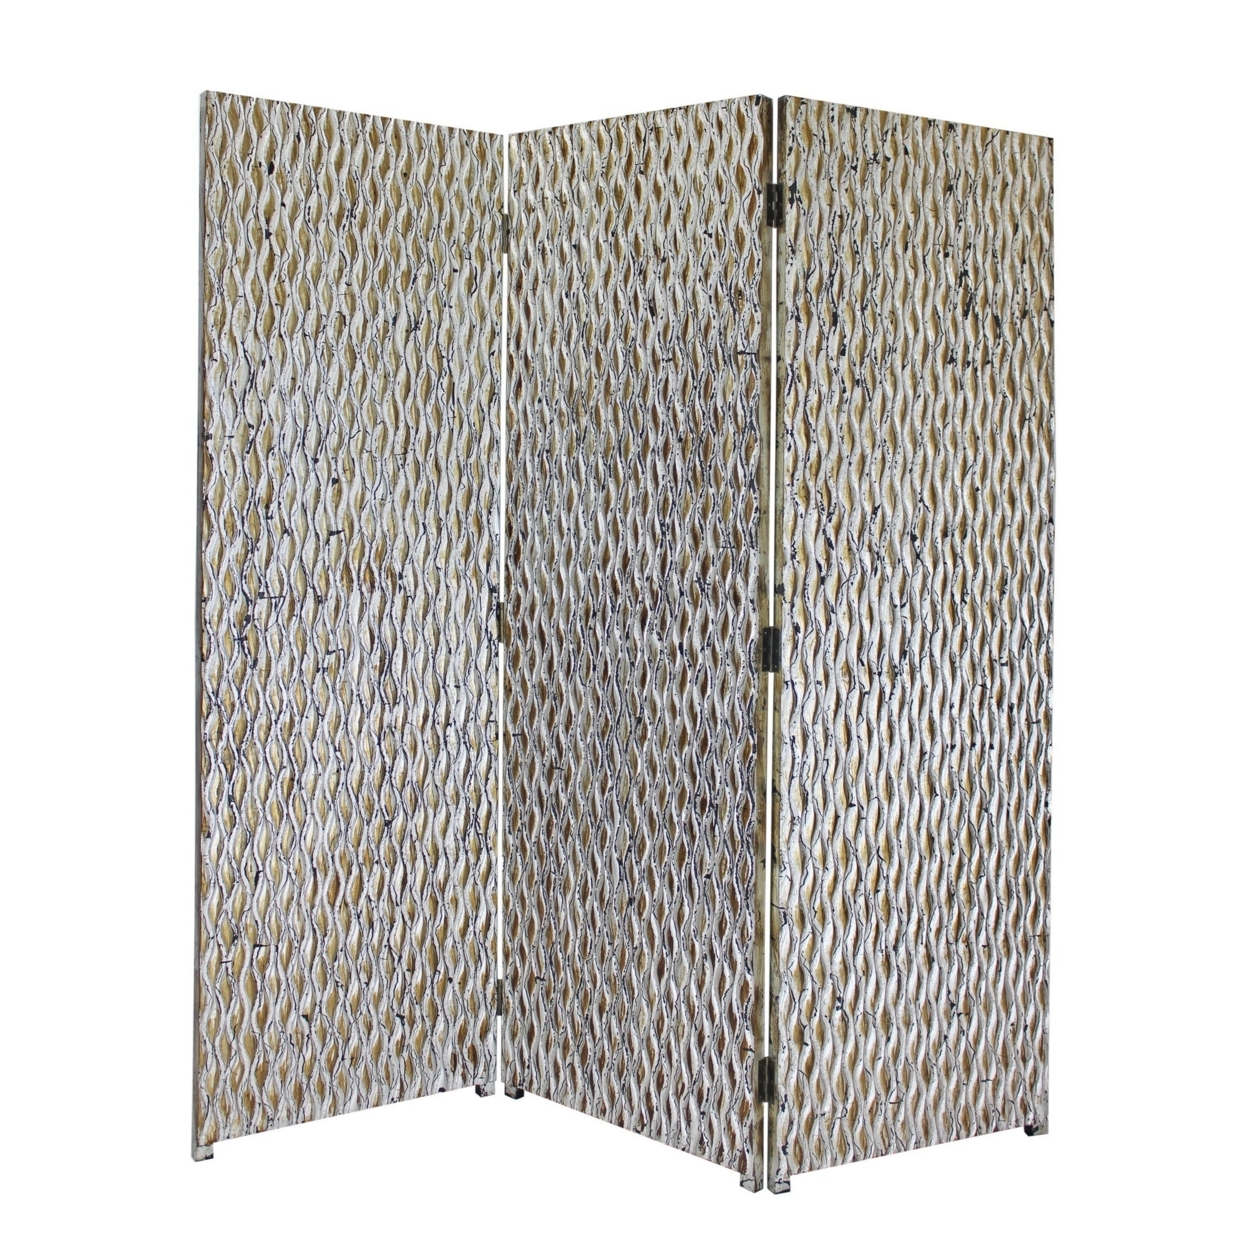 3 Panel 72 Inch Screen, 3D Wavy Pattern, Distressed Gray, Black, Brown